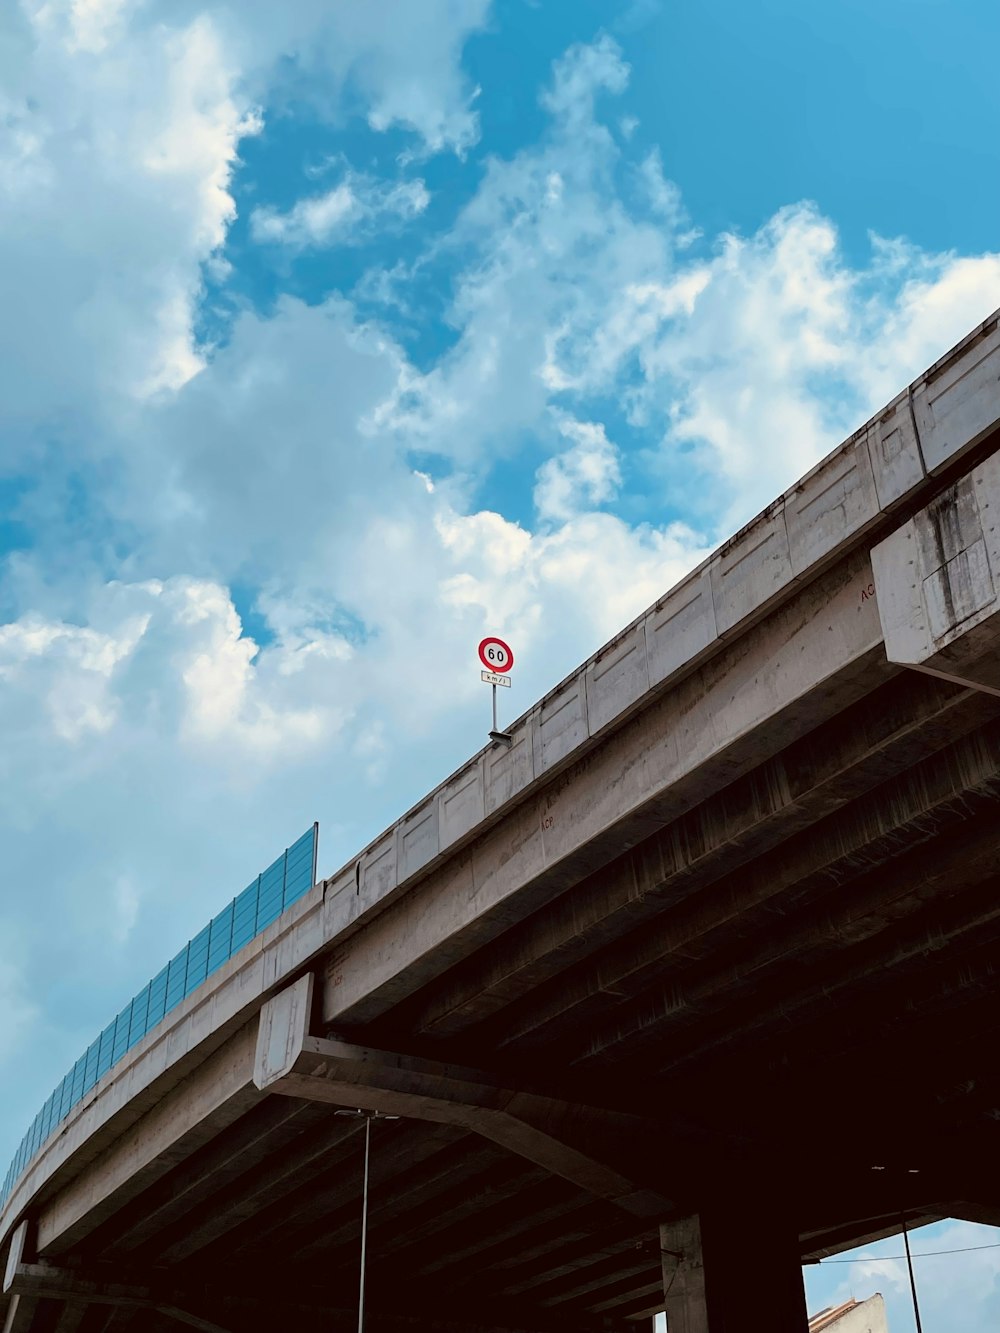 a red stop sign sitting on the side of a bridge